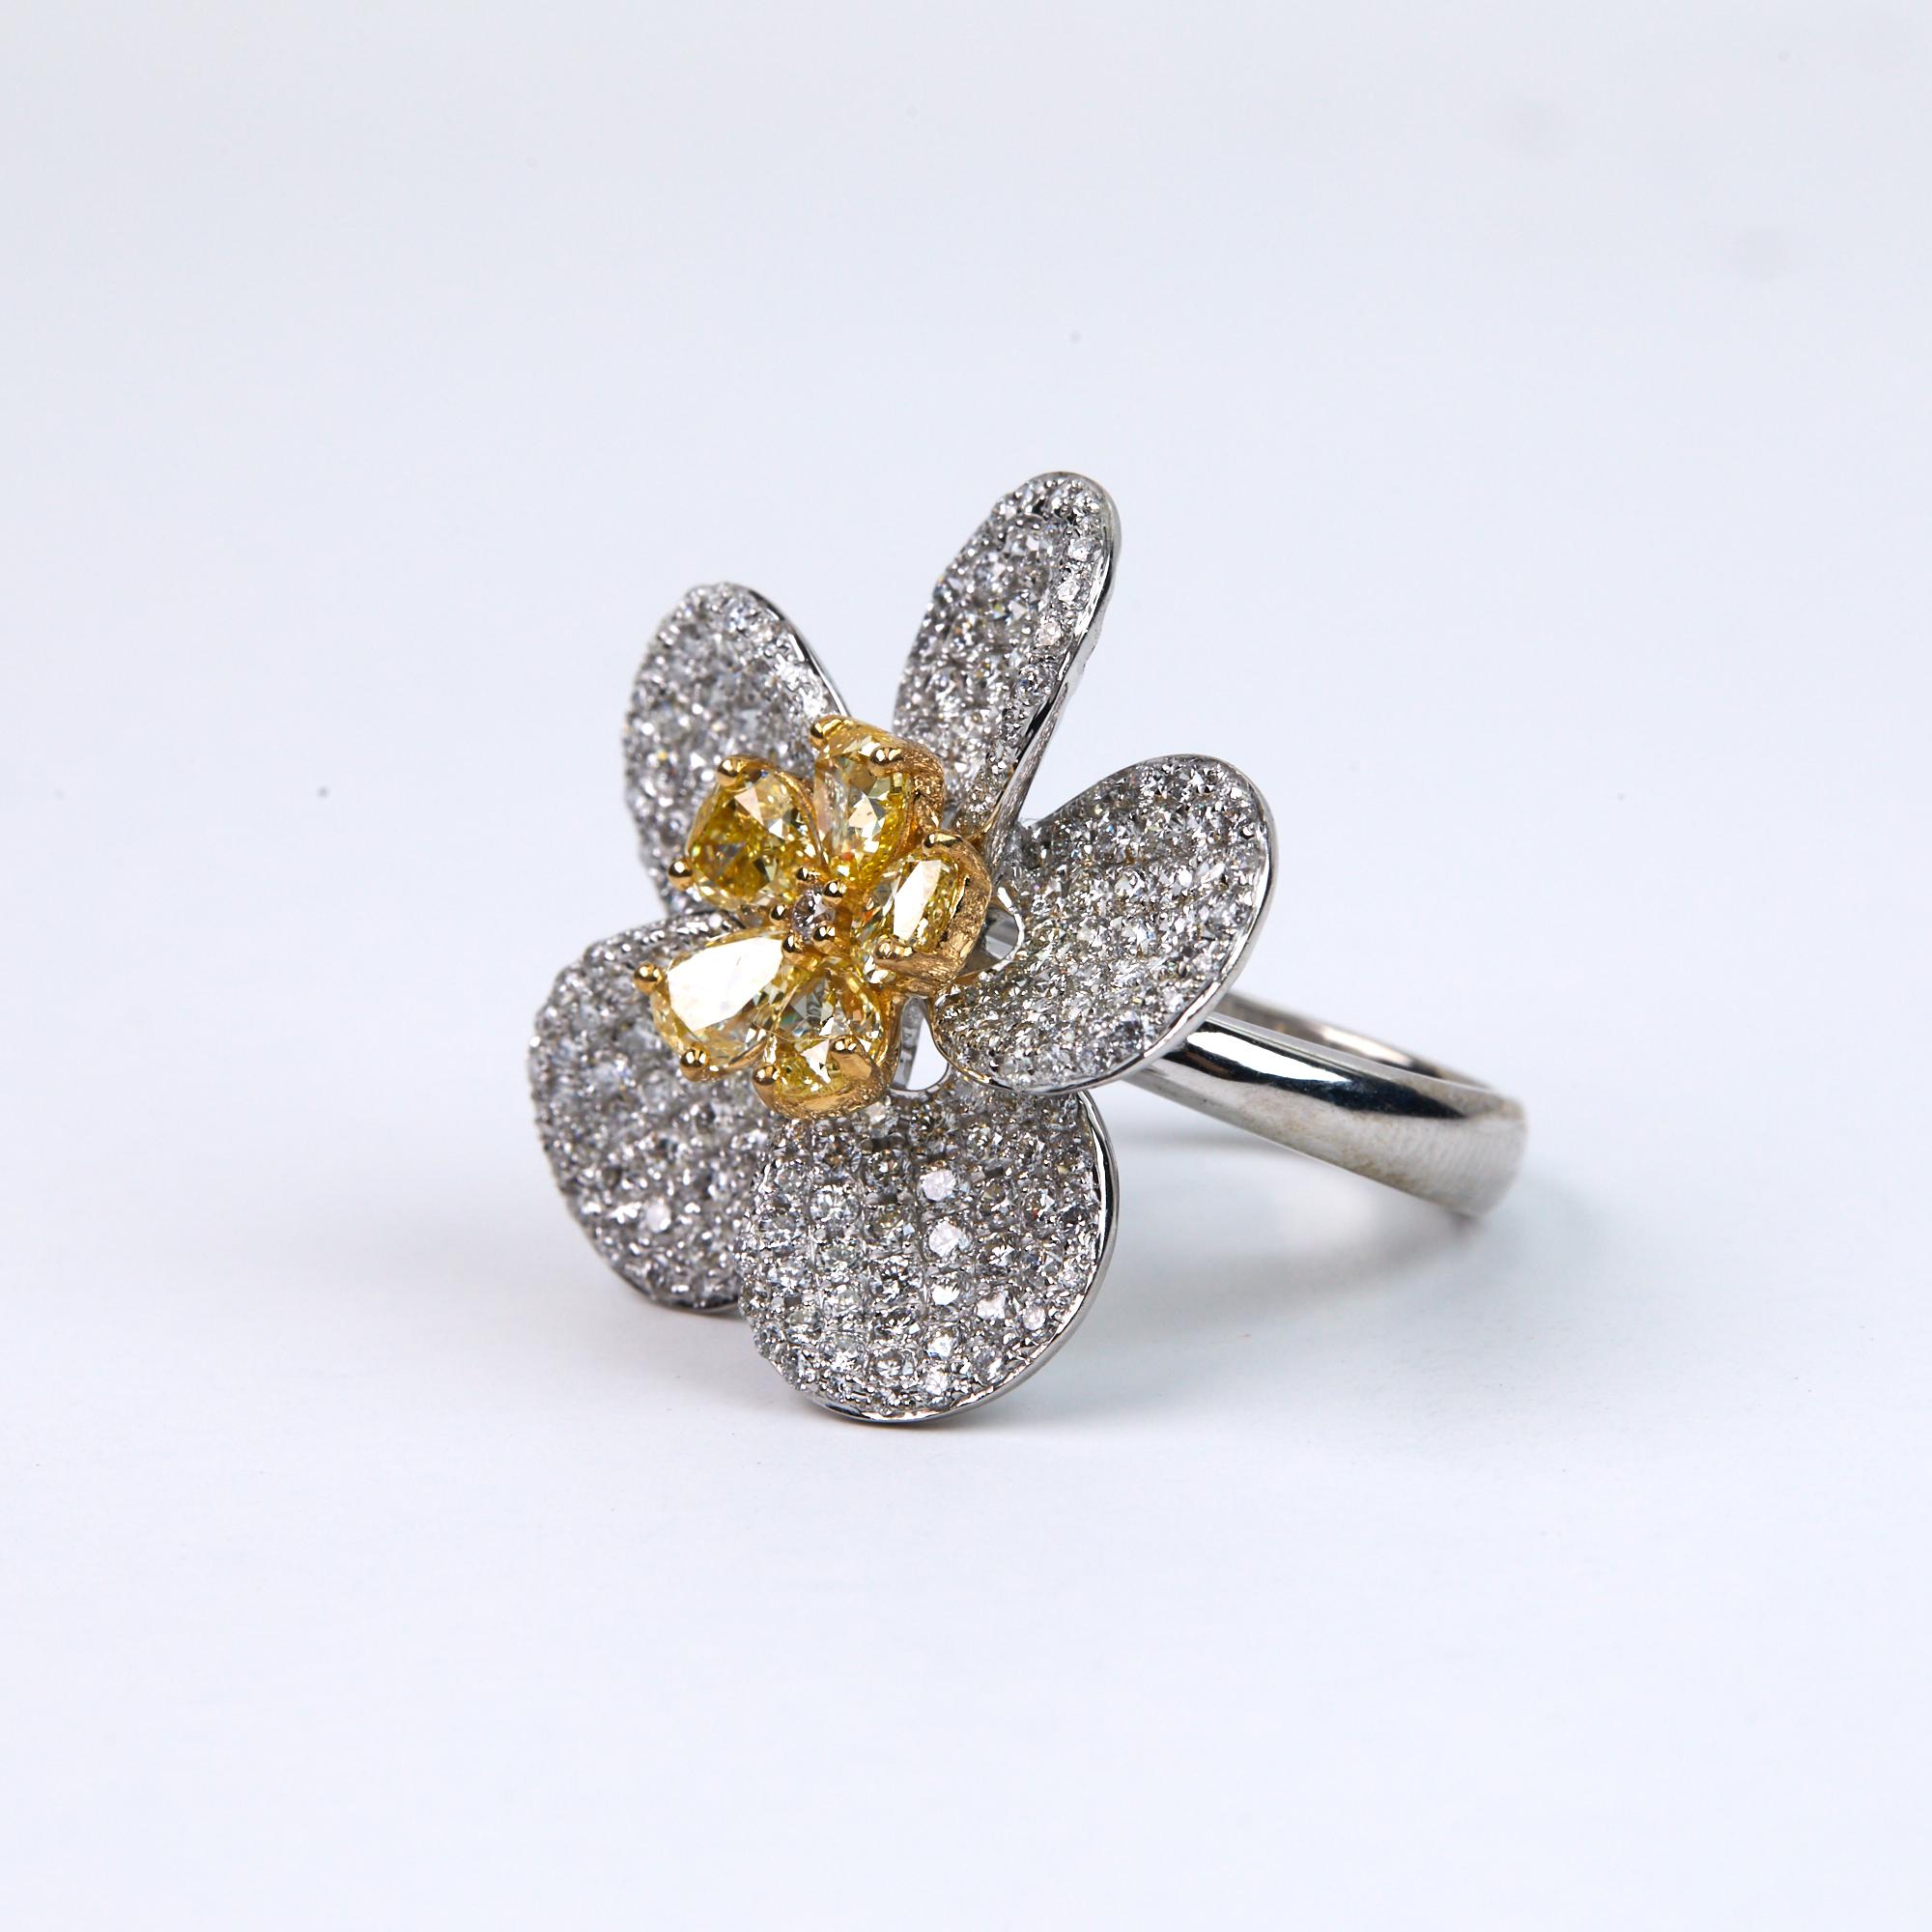 Contemporary 4.77 Carat Diamond Floral Cocktail Ring For Sale